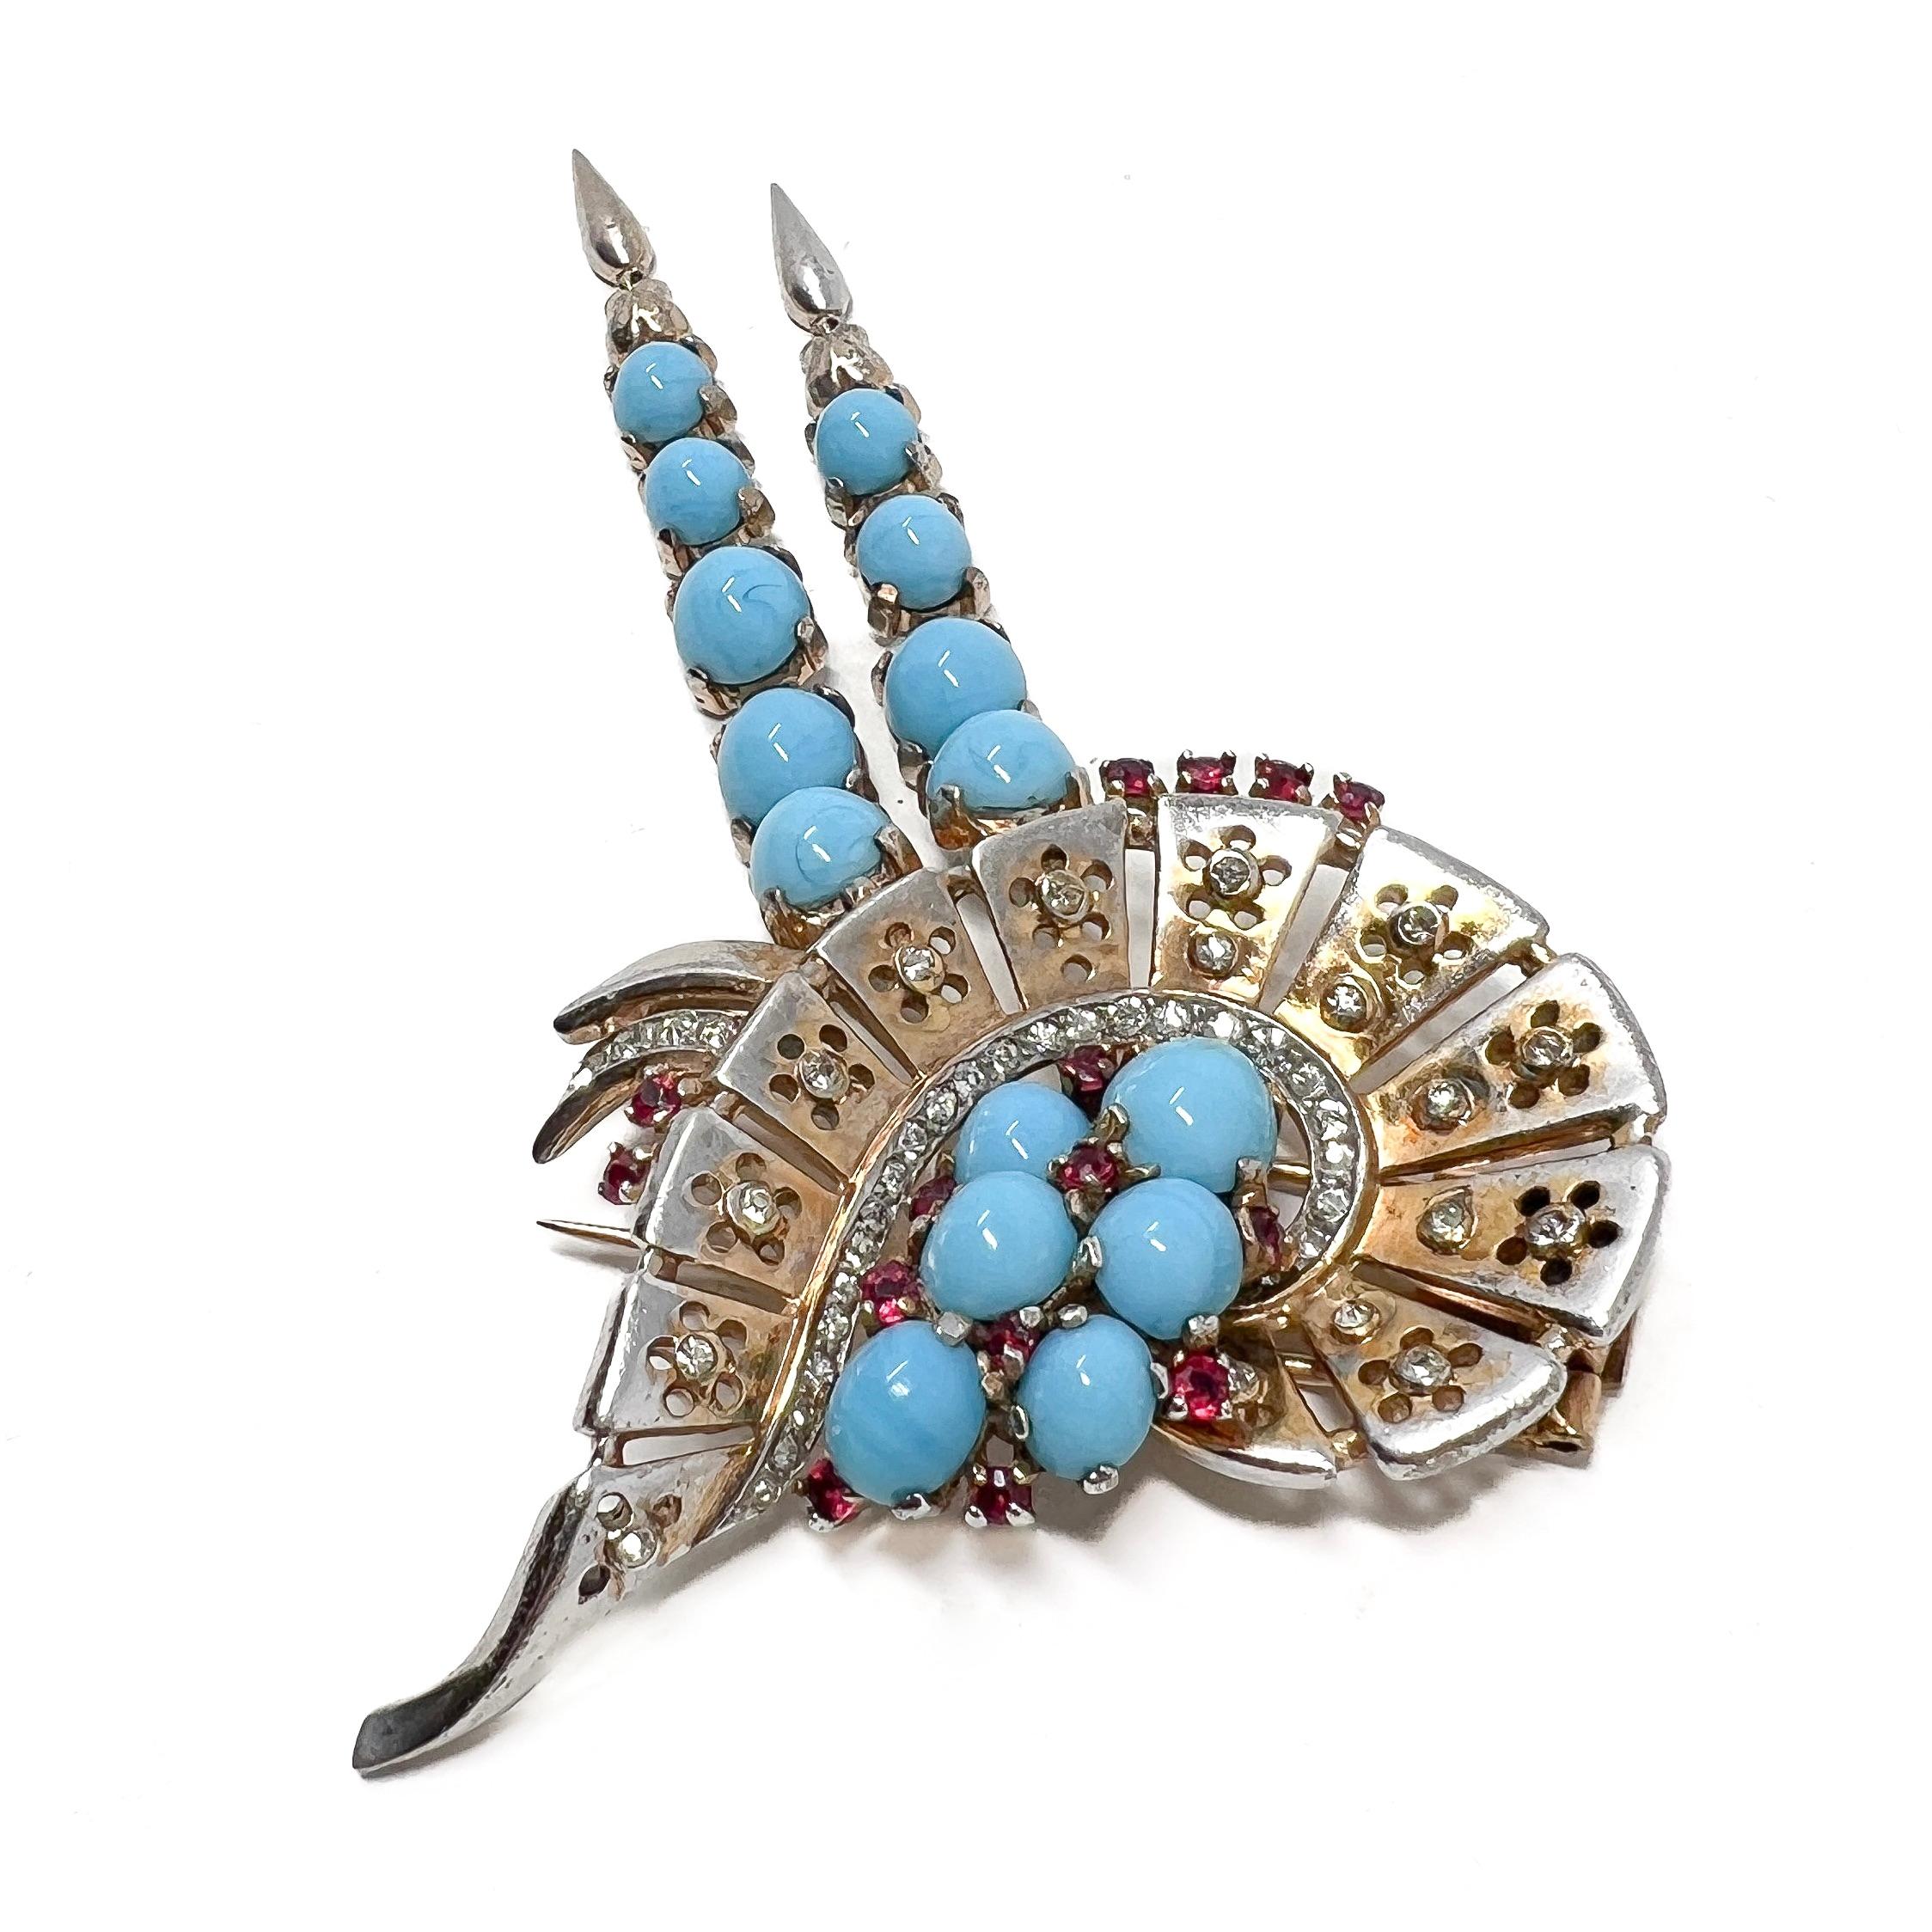 Trifari Mid-1940s Sterling Vermeil, Turquoise Glass and Ruby Paste Vintage Fur C For Sale 3